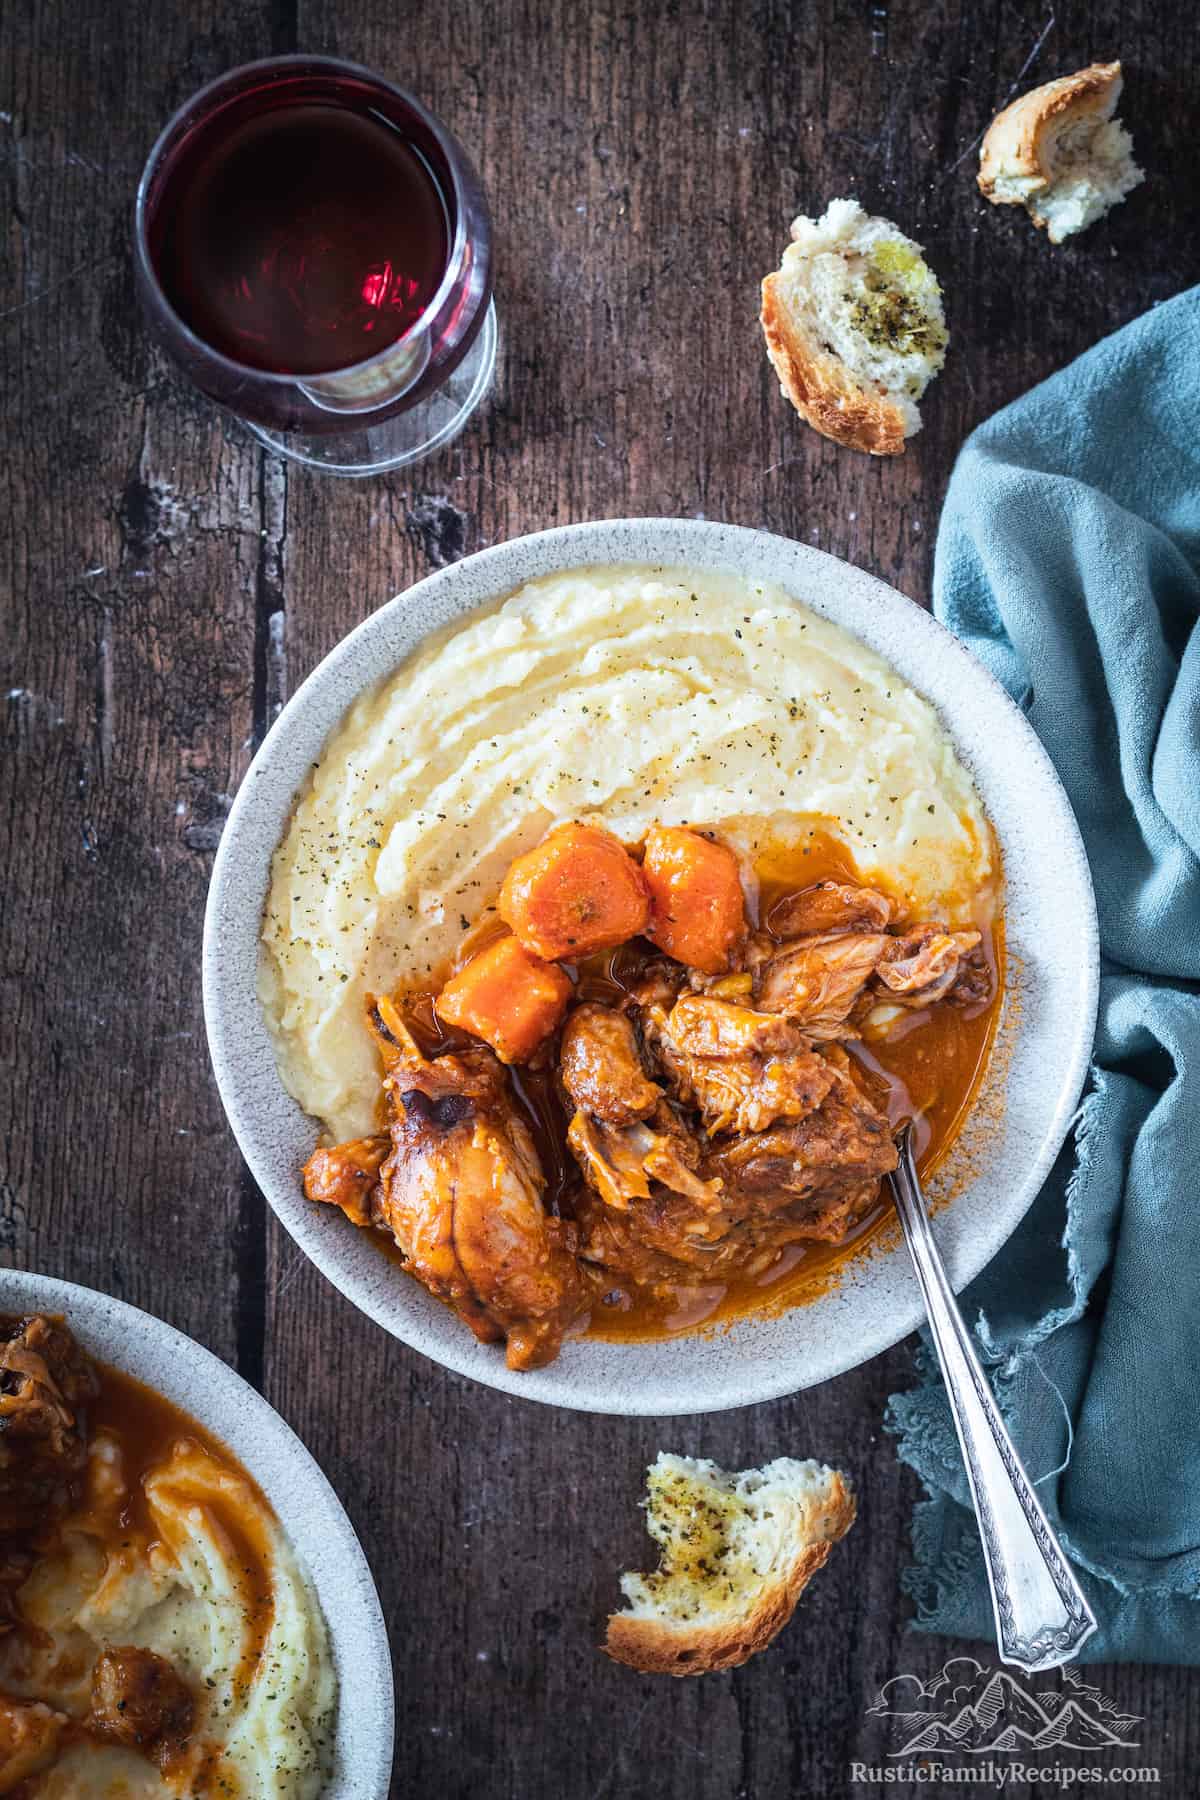 A bowl filled with rabbit stew with mashed potatoes and a slice of bread